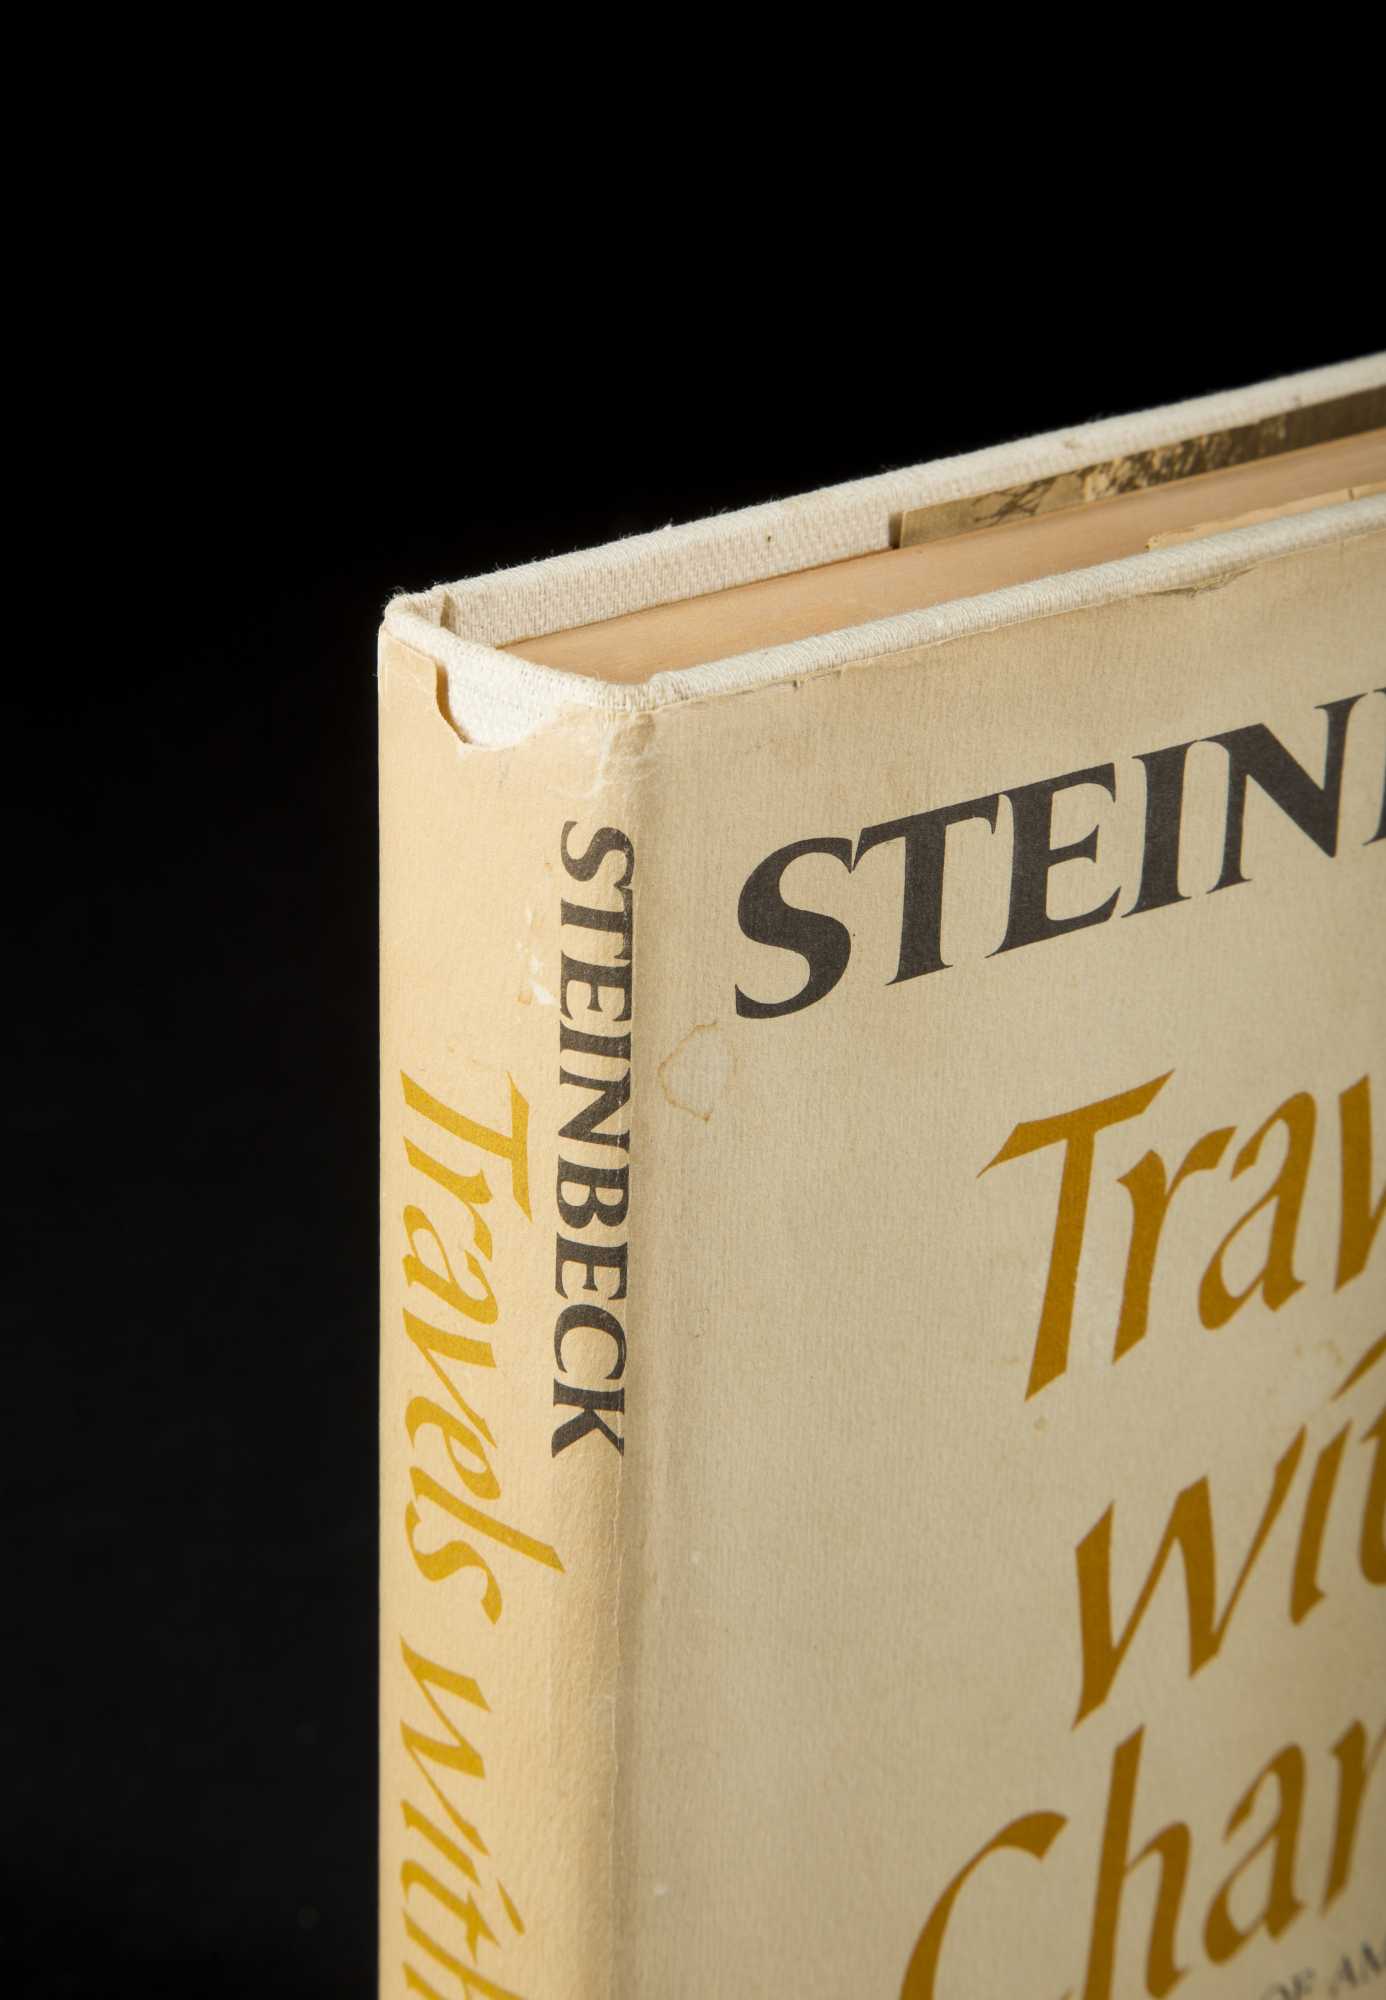 travels with charley by john steinbeck